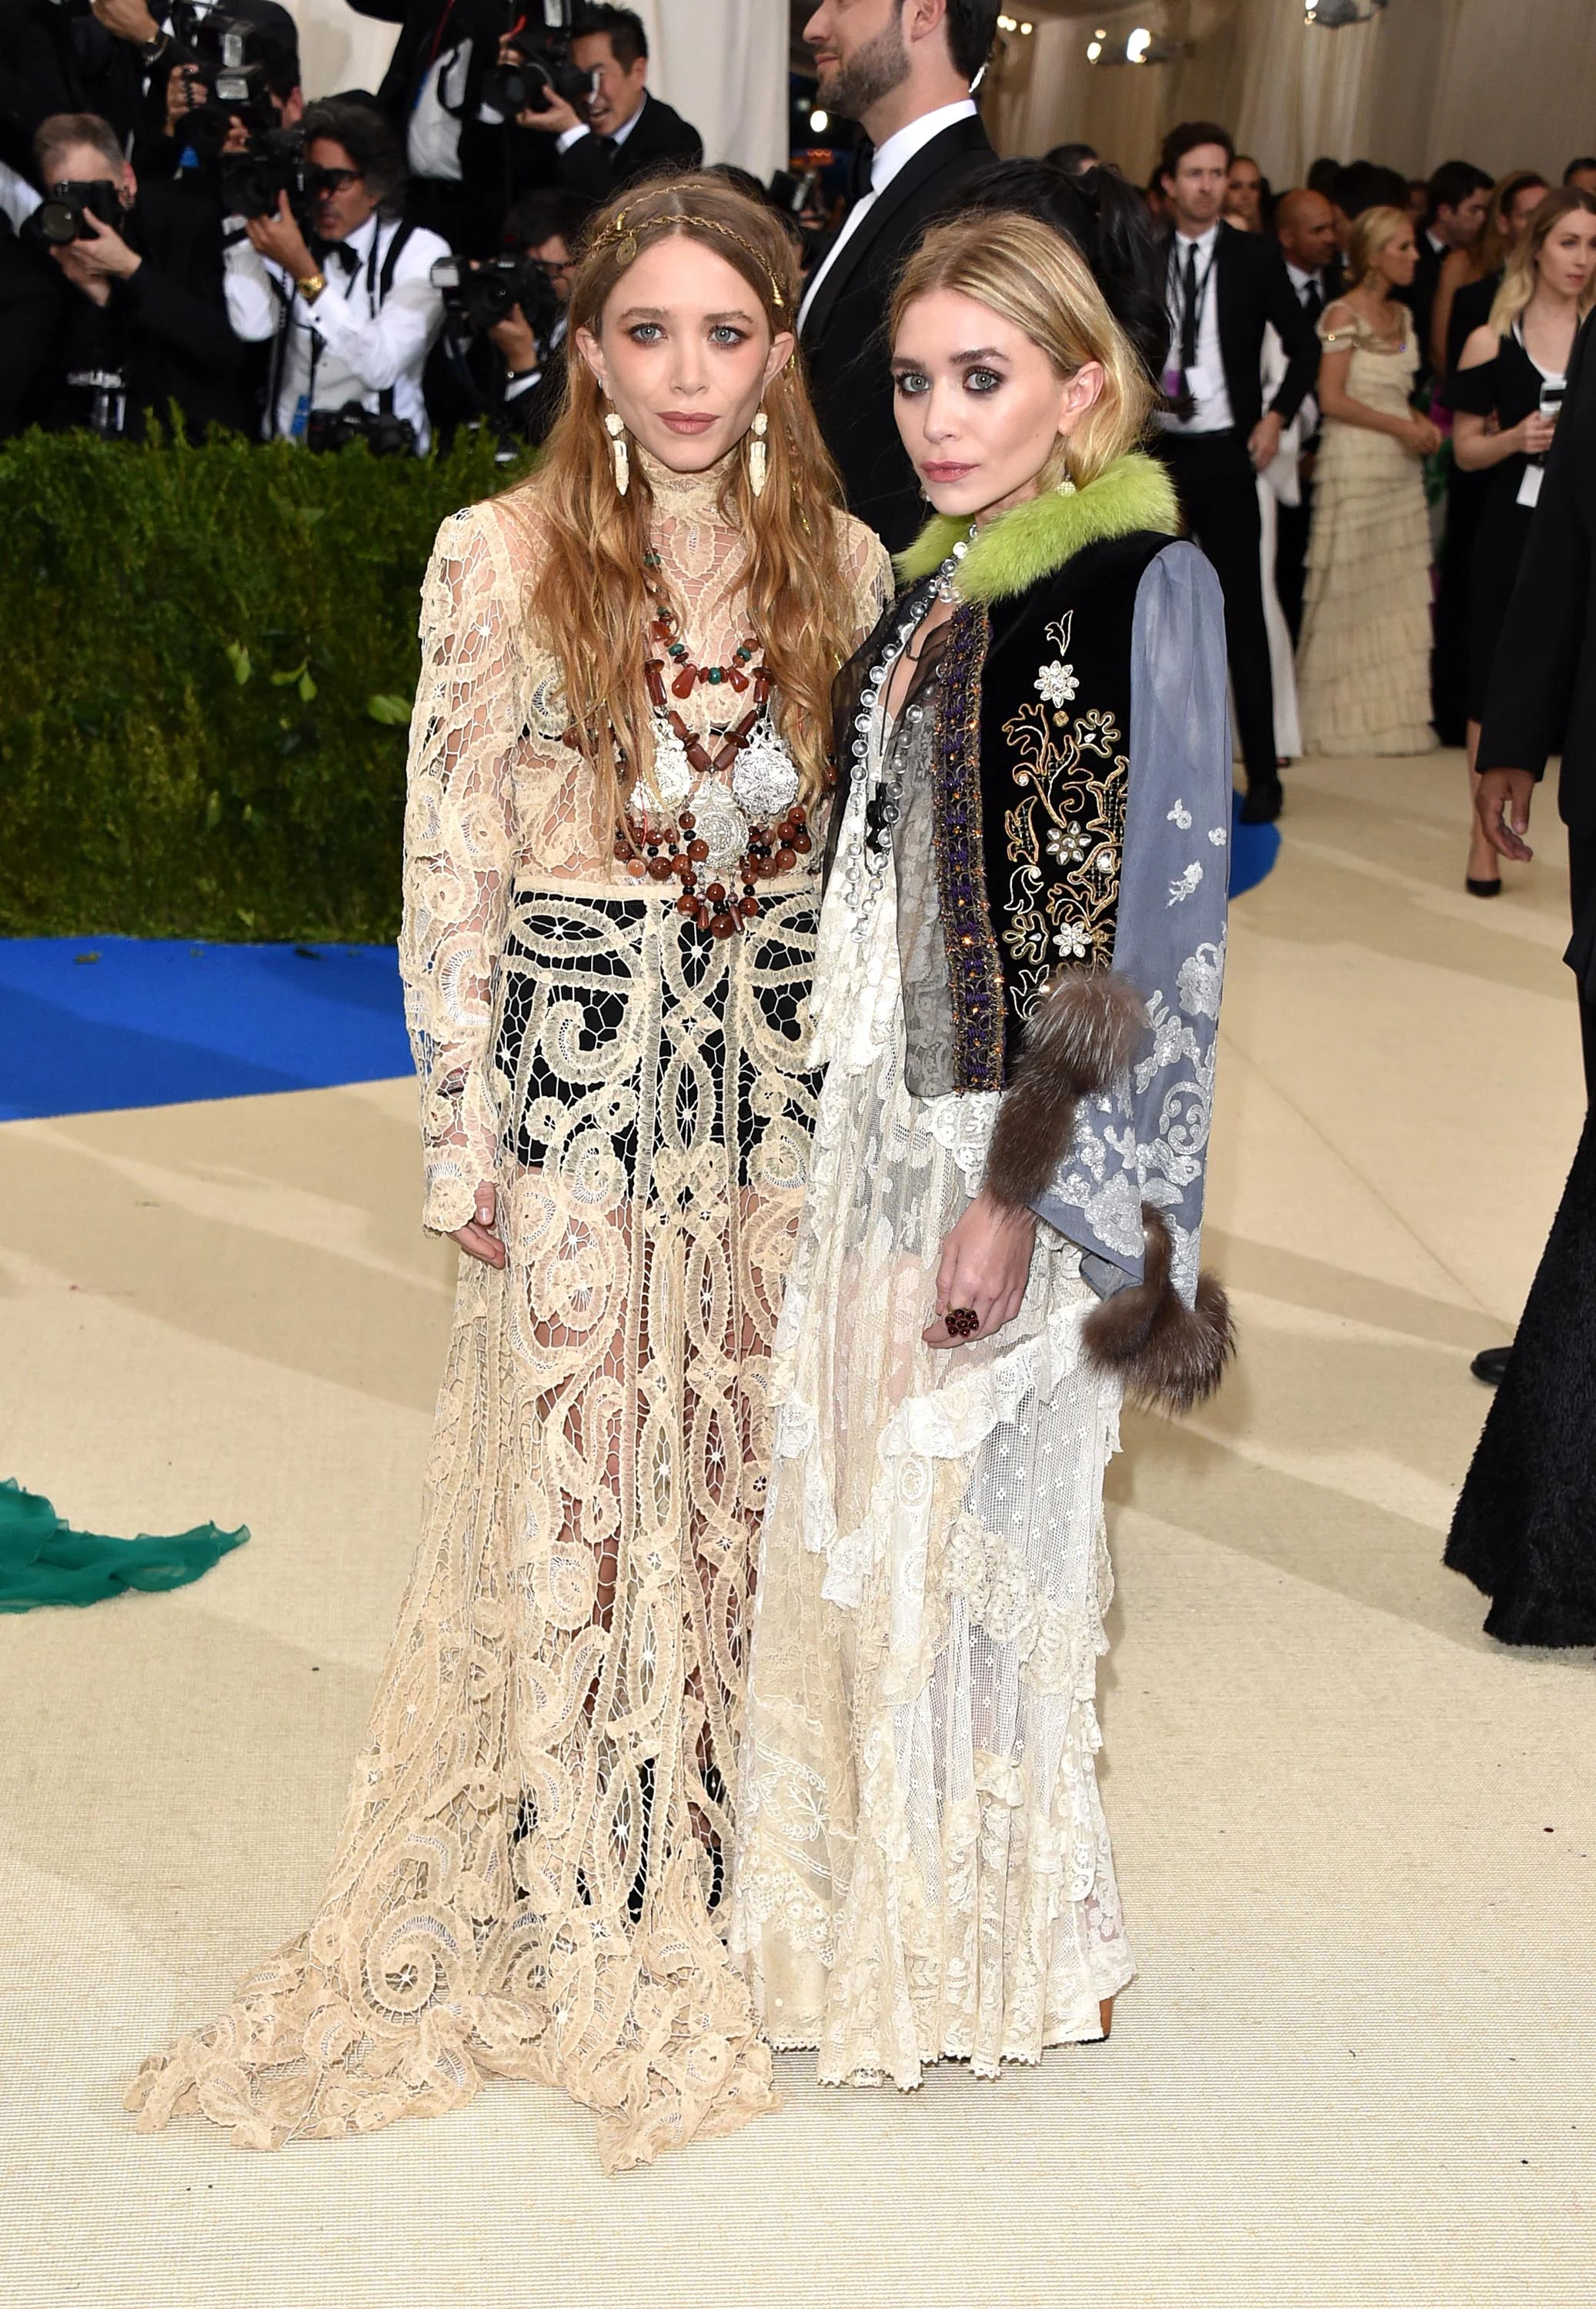 Mary-Kate and Ashley Olsen attend "Rei Kawakubo/Comme des Garcons: Art Of The In-Between" Costume Institute Gala at Metropolitan Museum of Art on May 1, 2017 in New York City. (Photo by John Shearer/Getty Images)